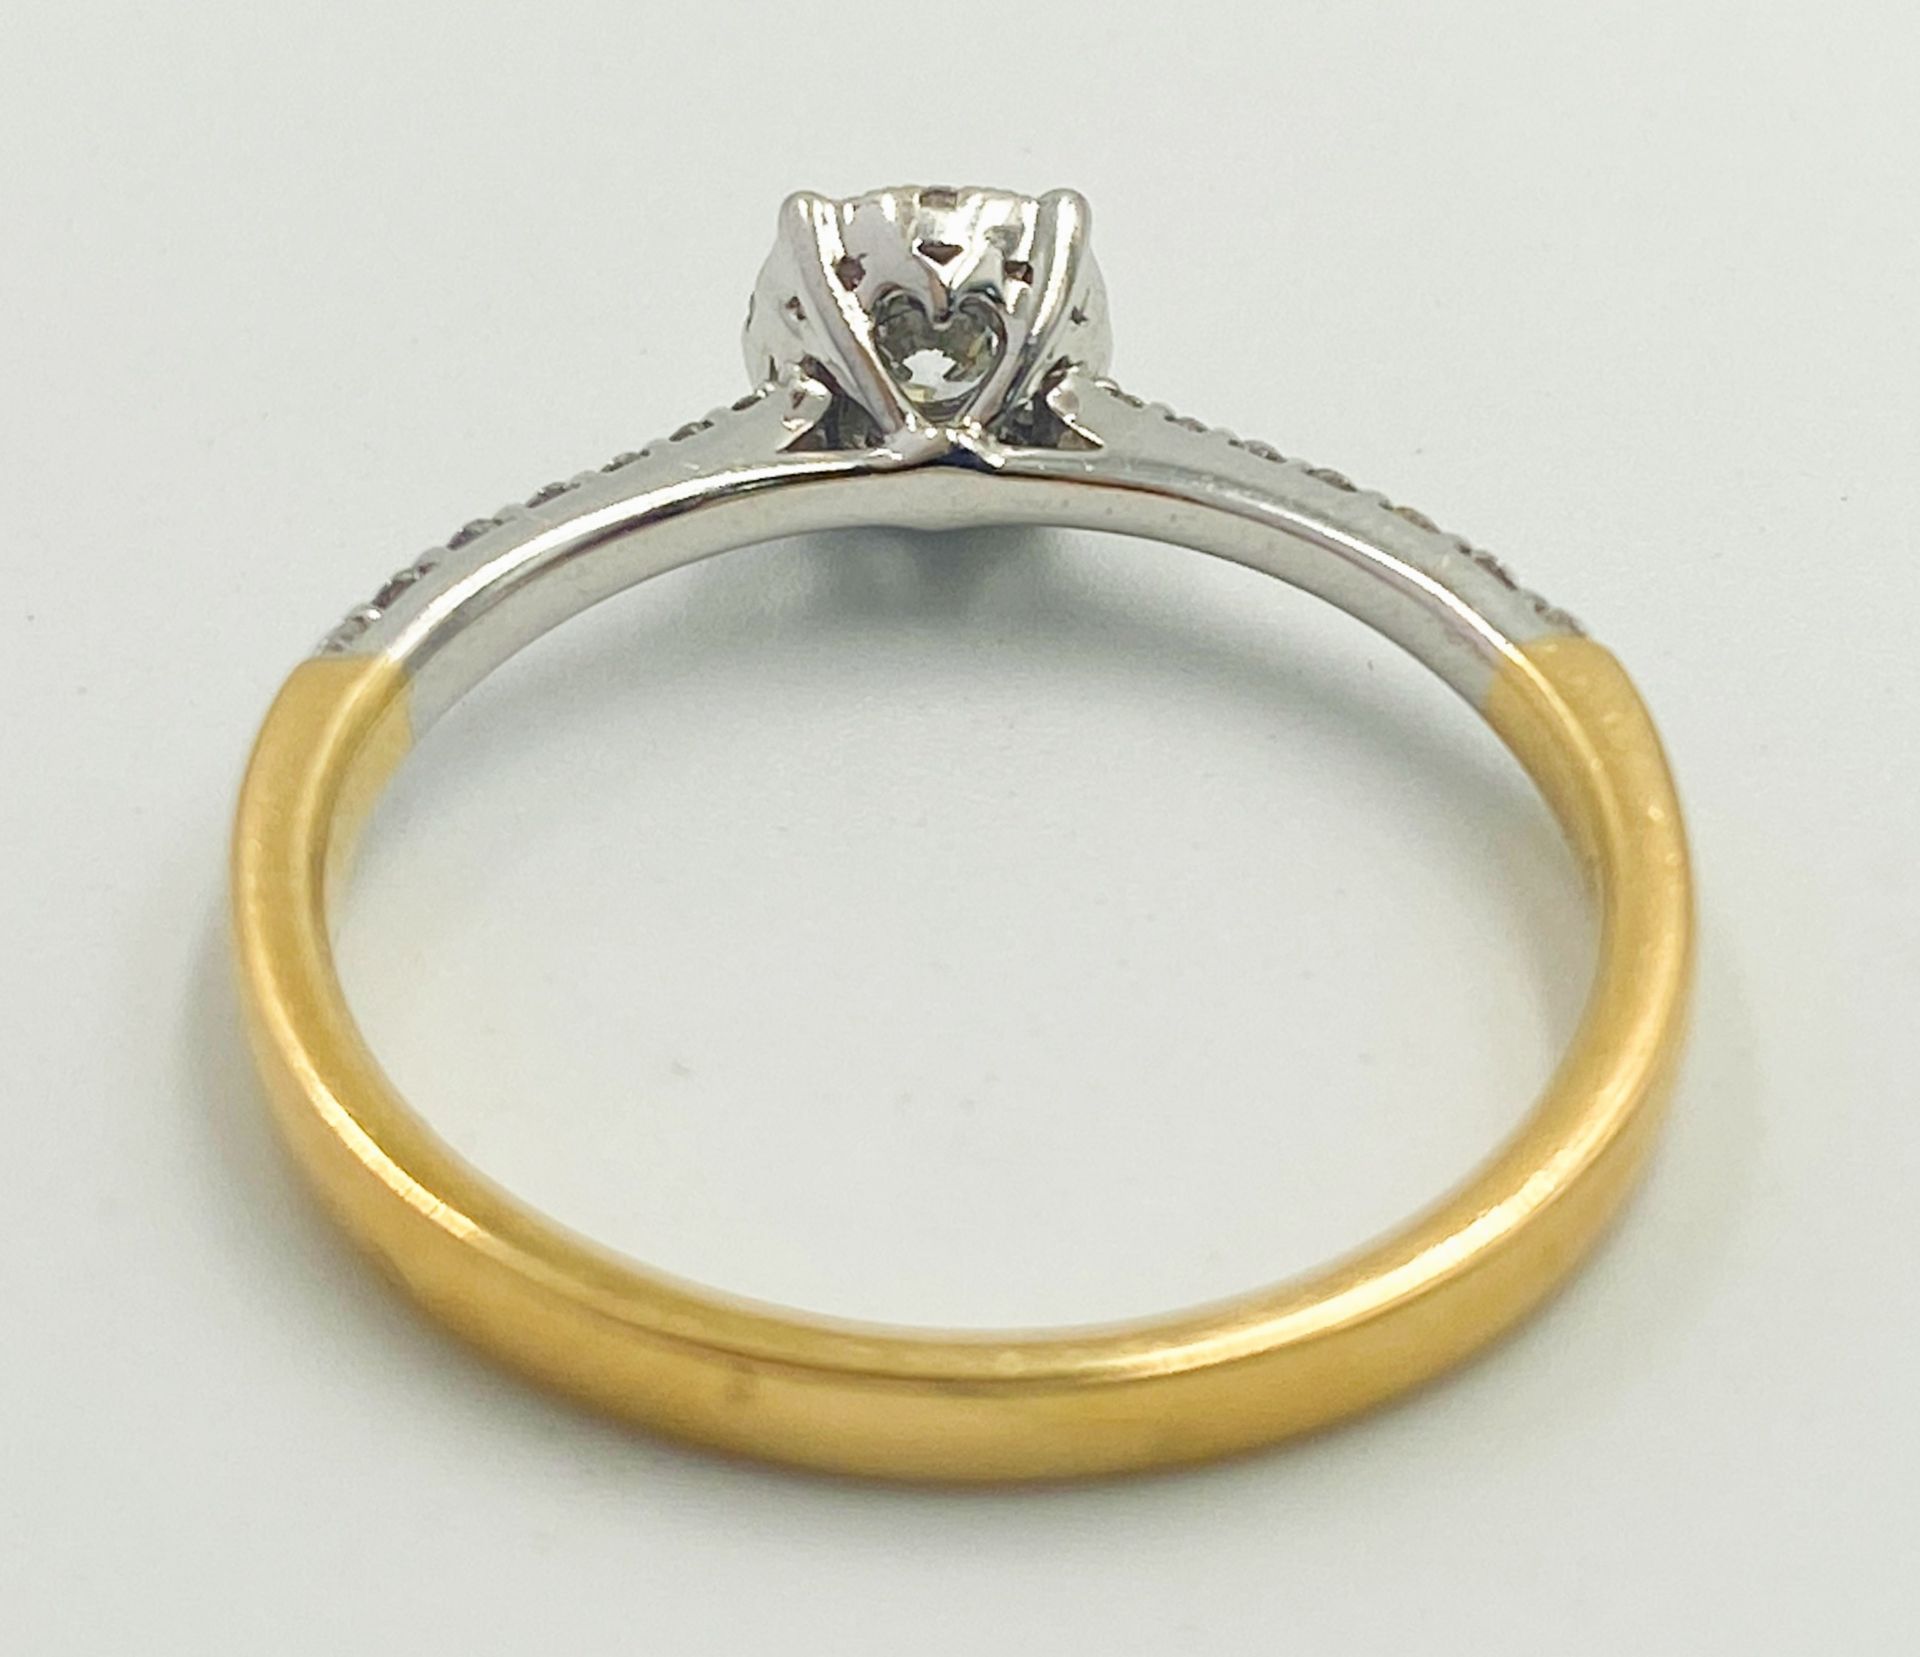 AN 18K YELLOW GOLD DIAMOND RING - 0.30CT. 2.5G. SIZE N. - Image 4 of 6